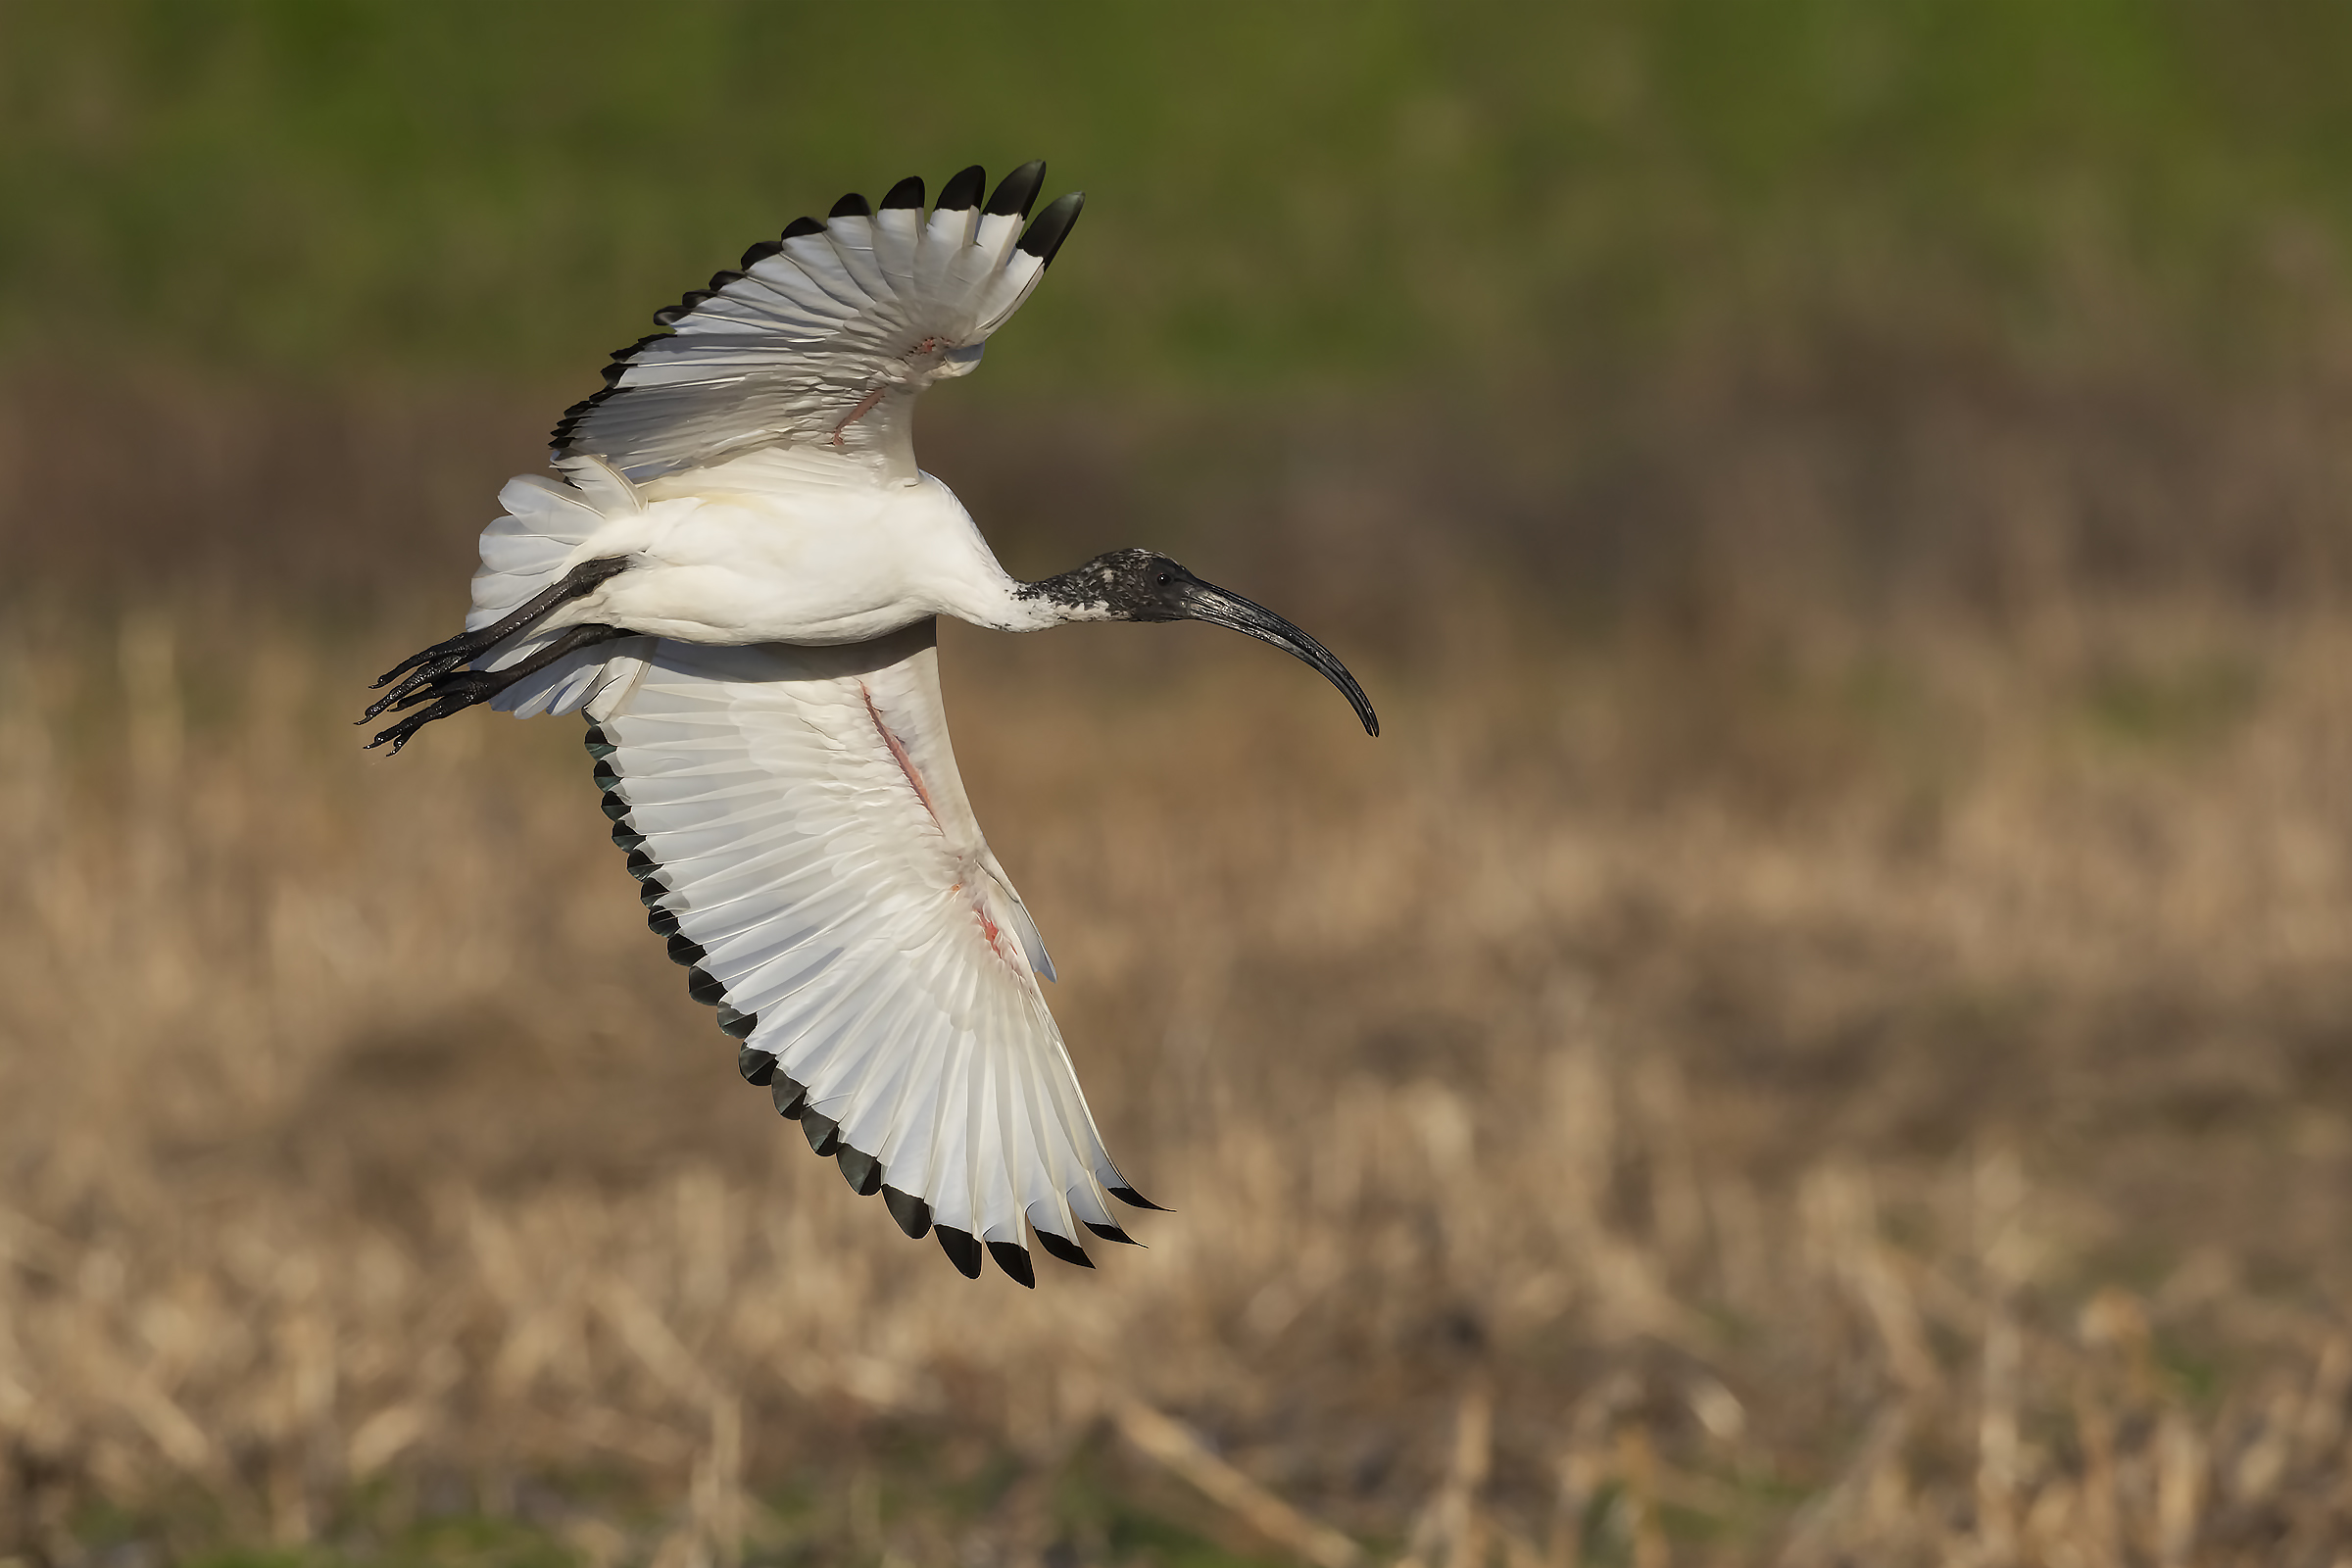 The turn of the sacred Ibis ...